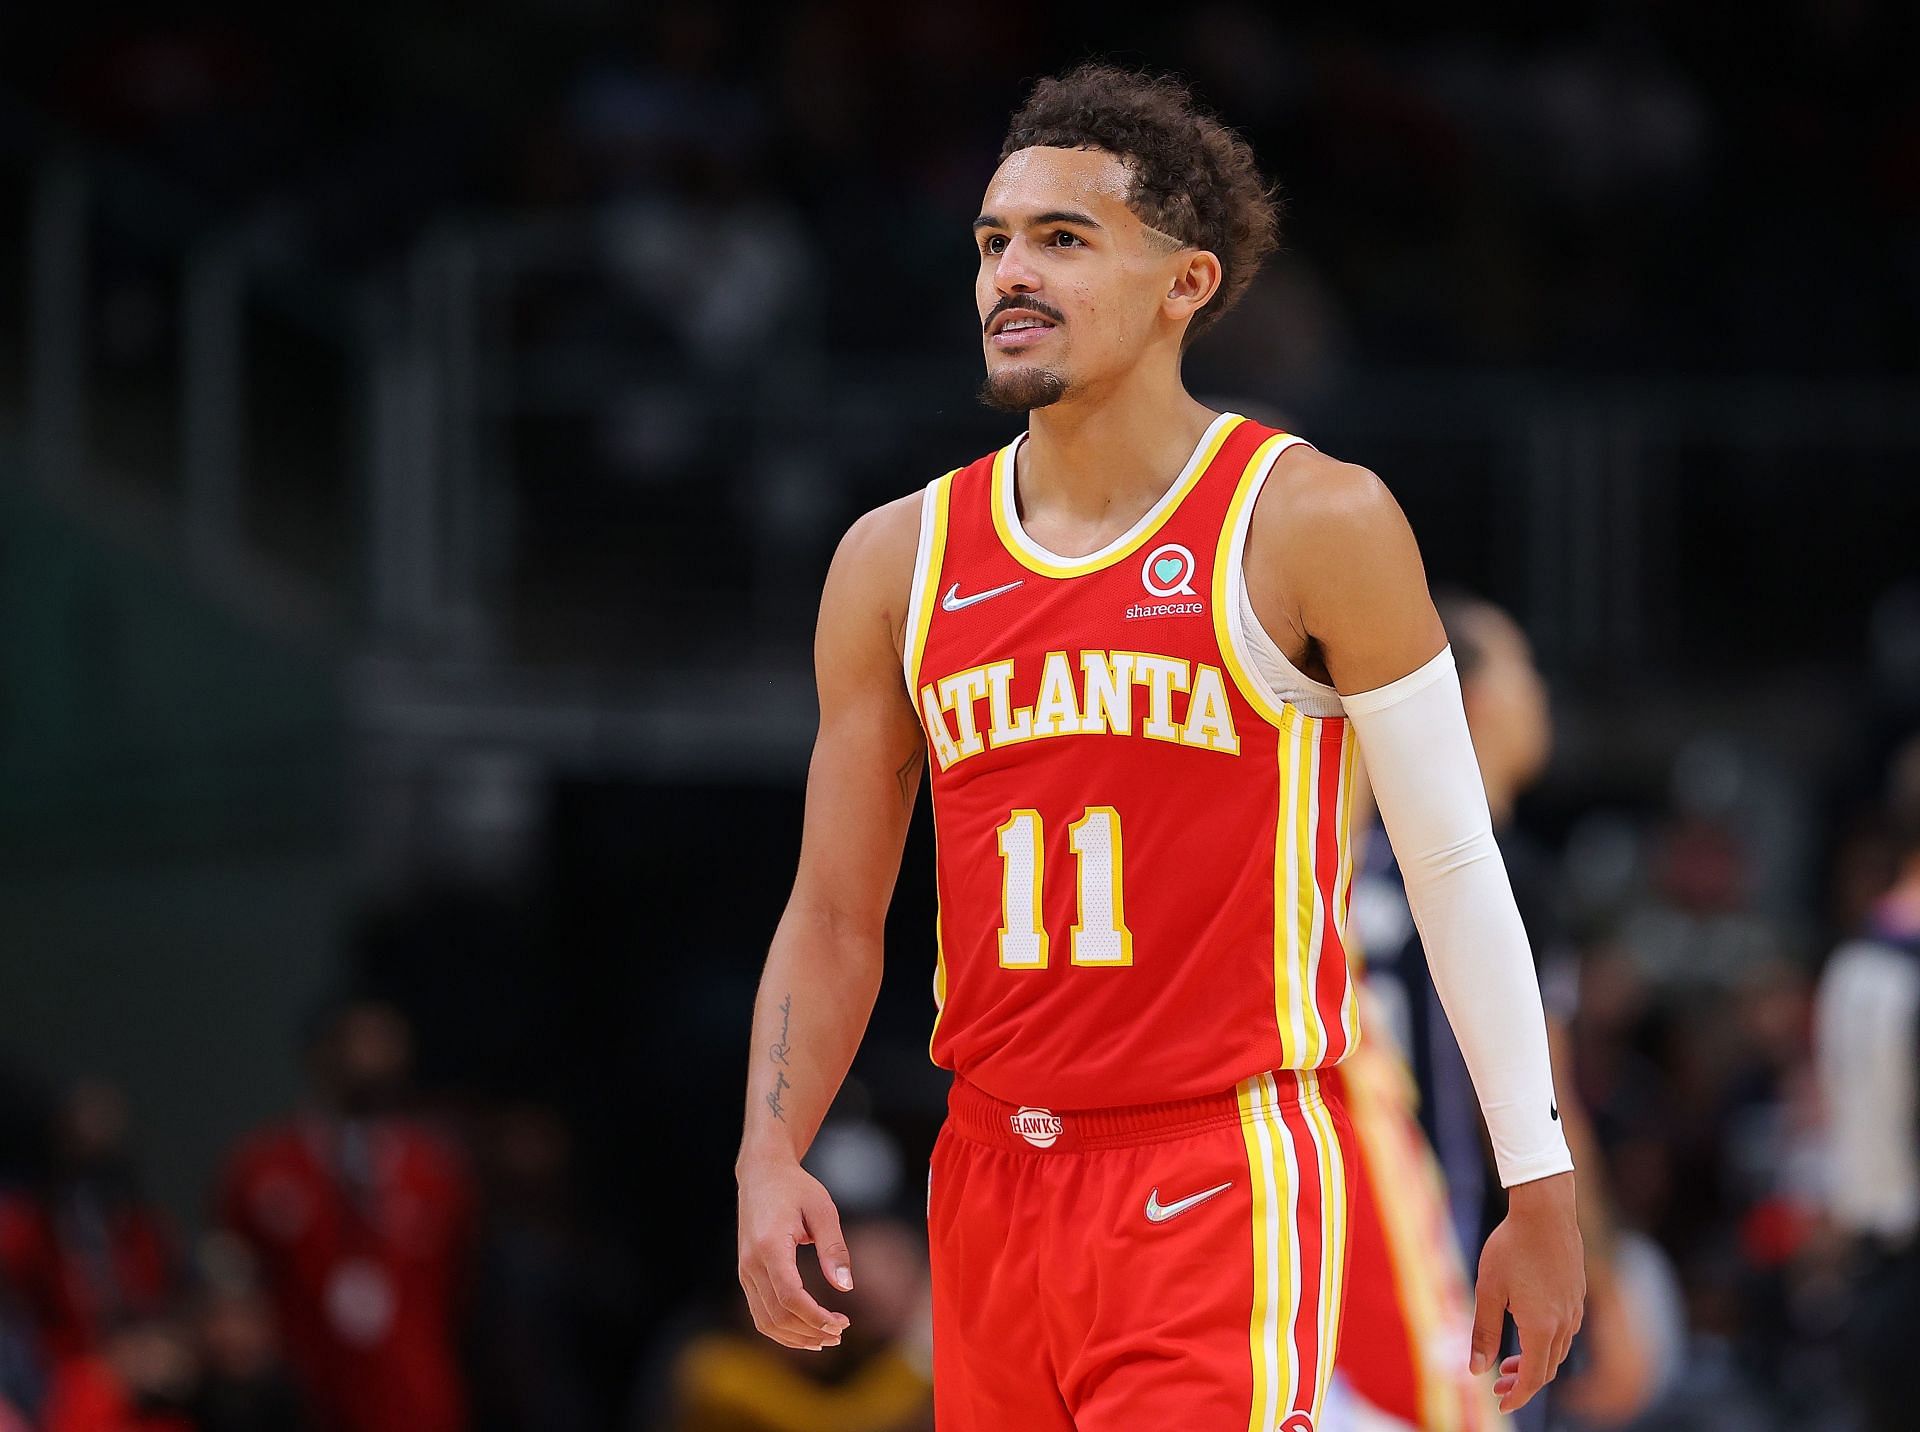 Trae Young records a new career-high against Portland Trail Blazers on January 3rd